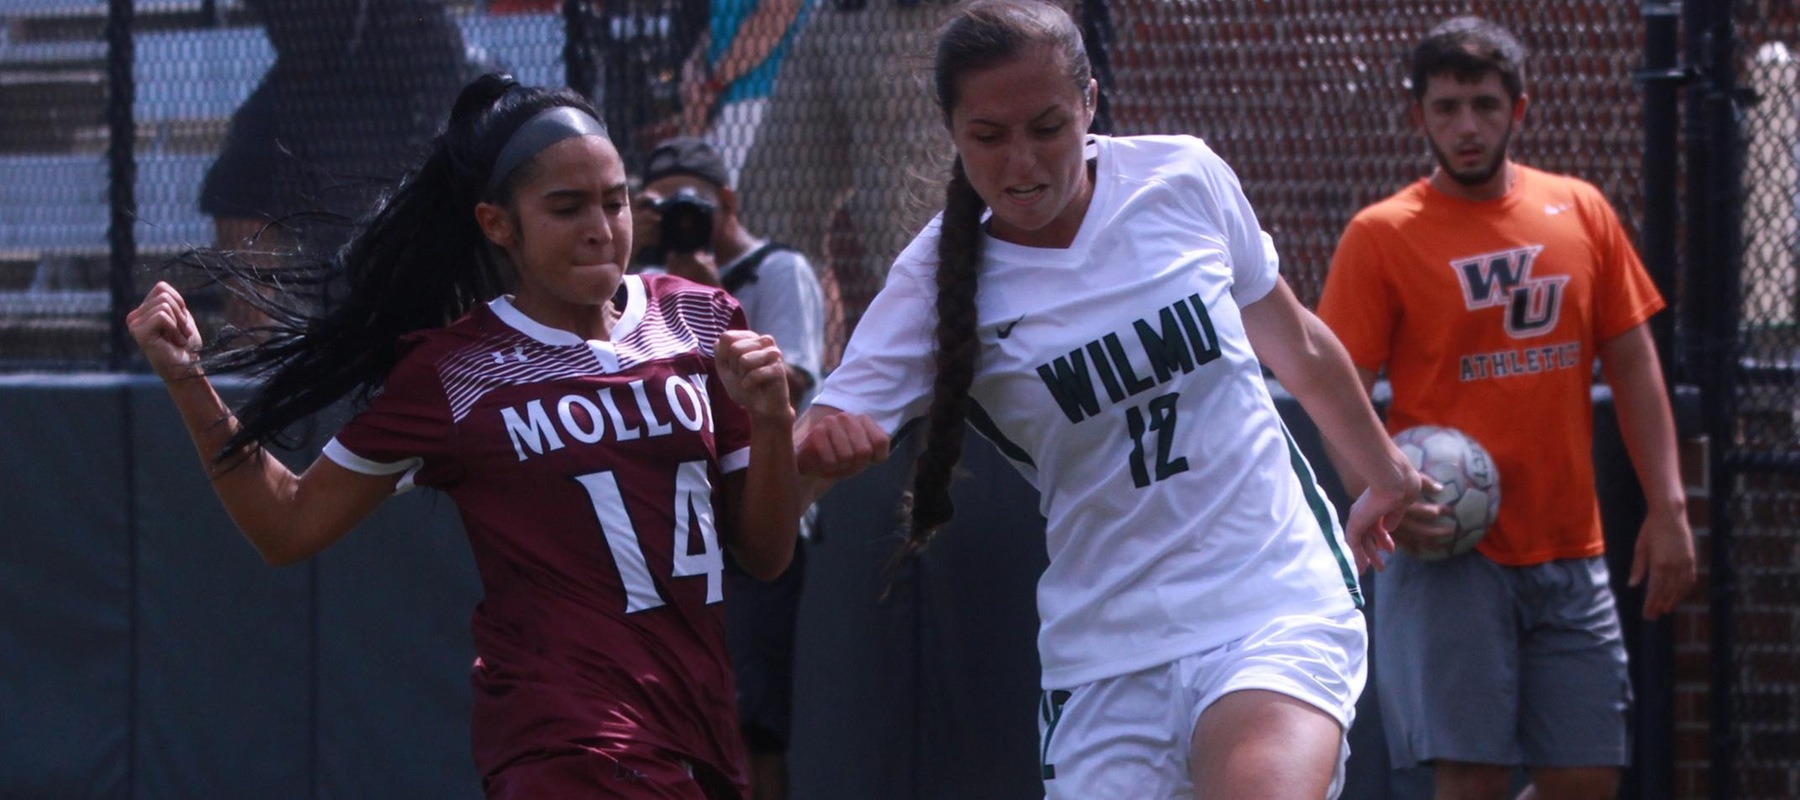 Wilmington University player Kasie Lambert (12) battles for possession with Molloy College player Joanna Graca (14) during their NCAA women?s soccer match at the Wilmington University sports facility in Newark, Delaware, September 11, 2021. Photo by Jeff Batt